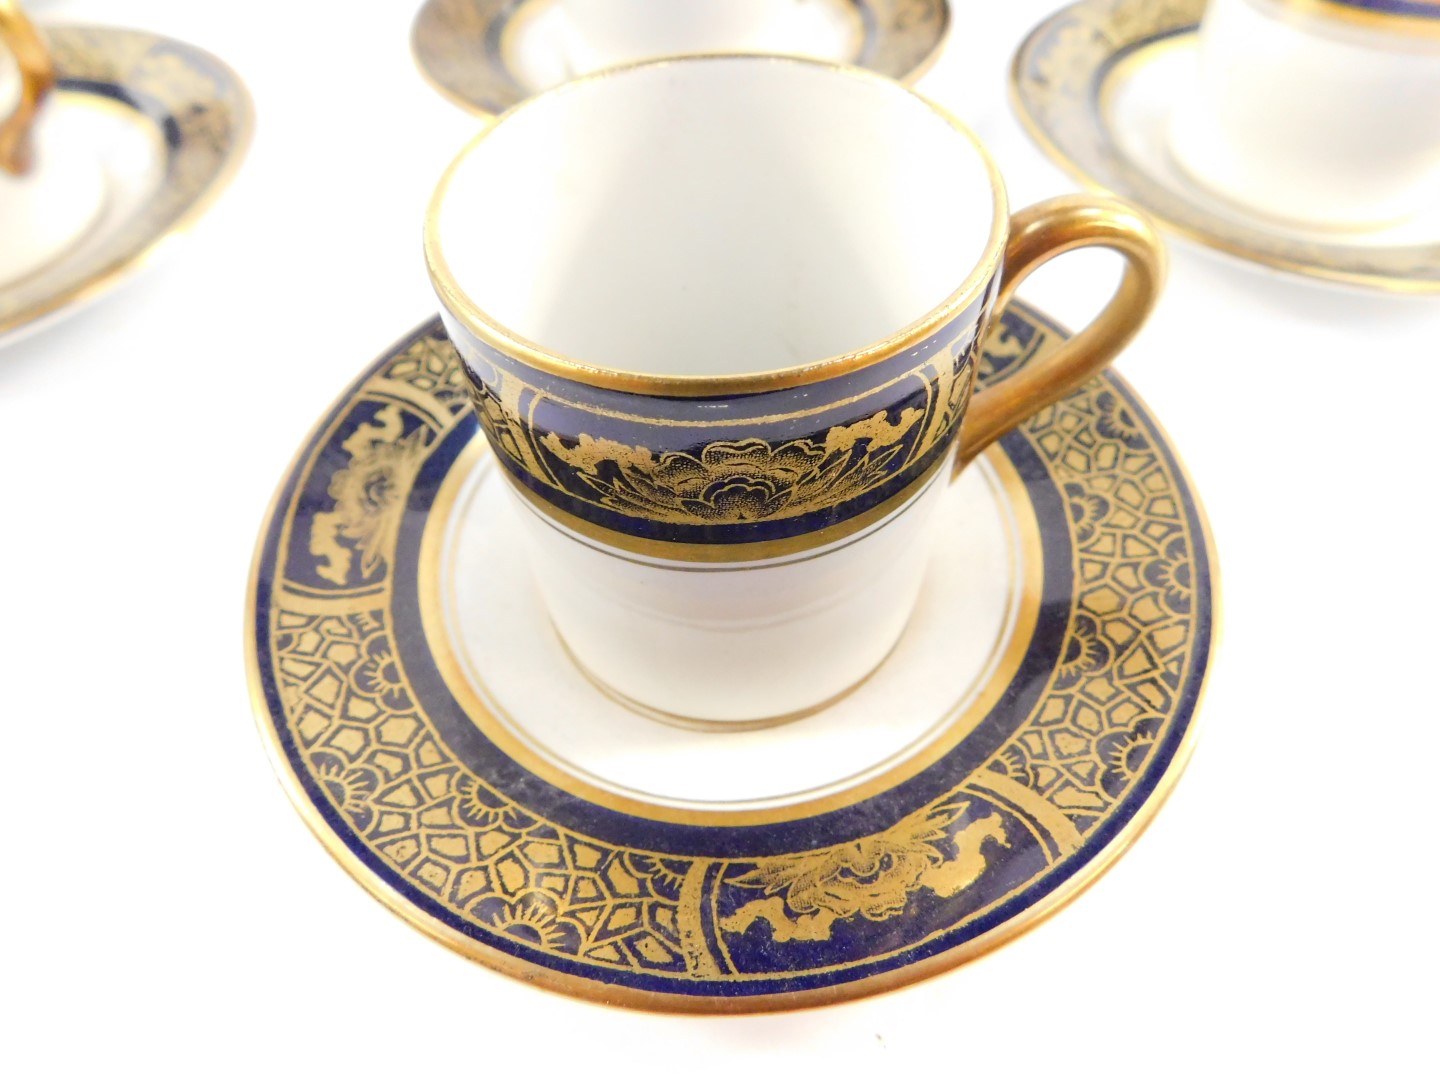 A Soho Pottery Solian ware part coffee service, decorated in cobalt blue and gilt with waterlilies - Image 2 of 3